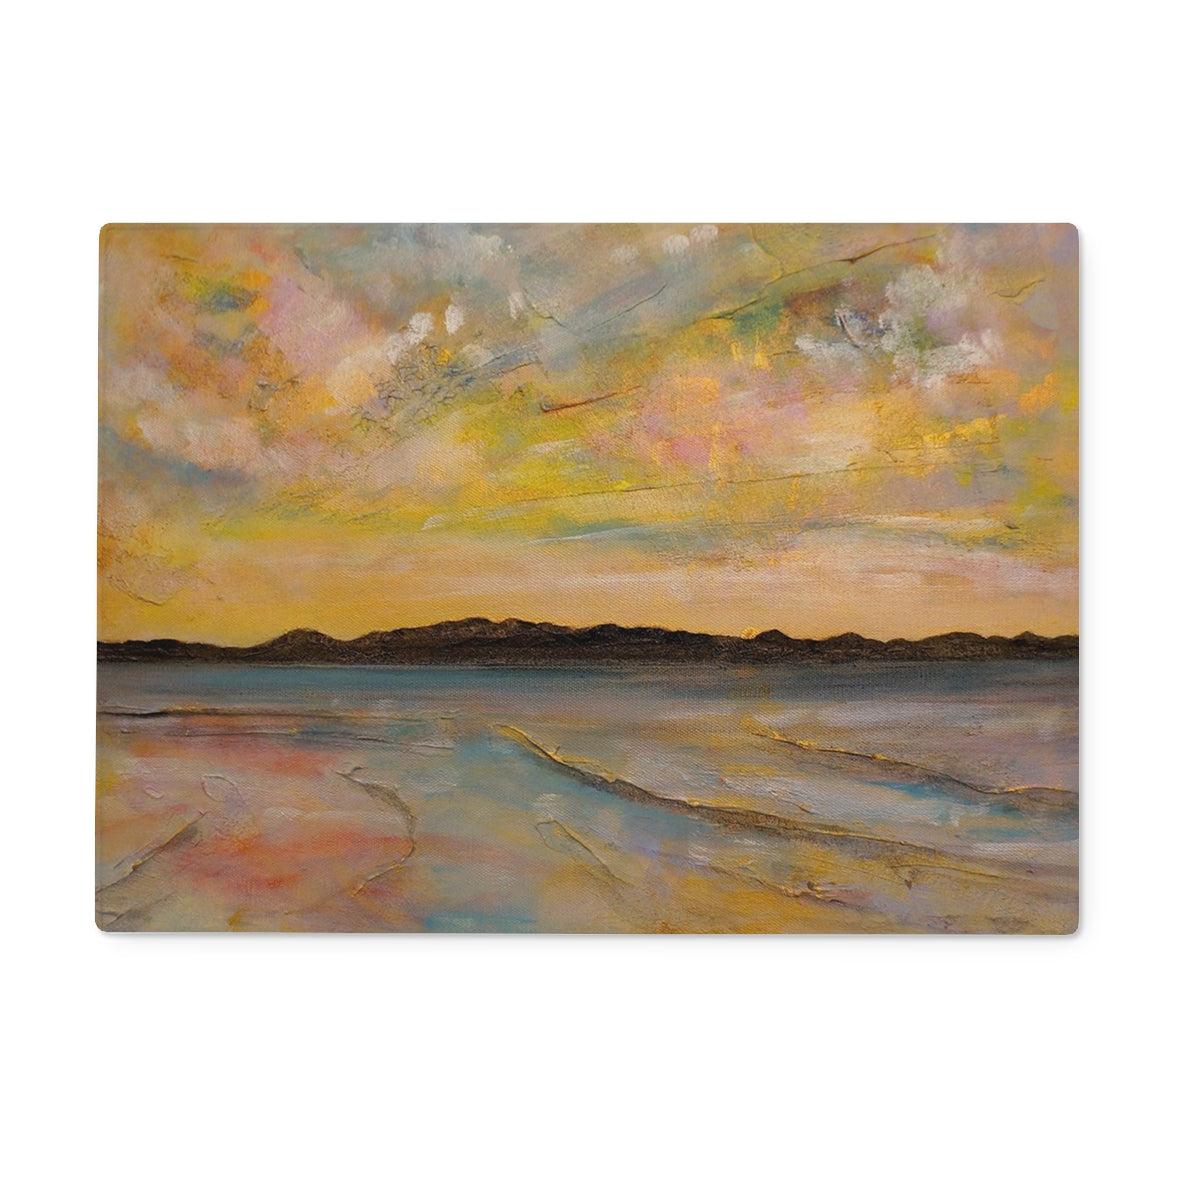 Vallay Island North Uist Art Gifts Glass Chopping Board-Glass Chopping Boards-Hebridean Islands Art Gallery-15"x11" Rectangular-Paintings, Prints, Homeware, Art Gifts From Scotland By Scottish Artist Kevin Hunter